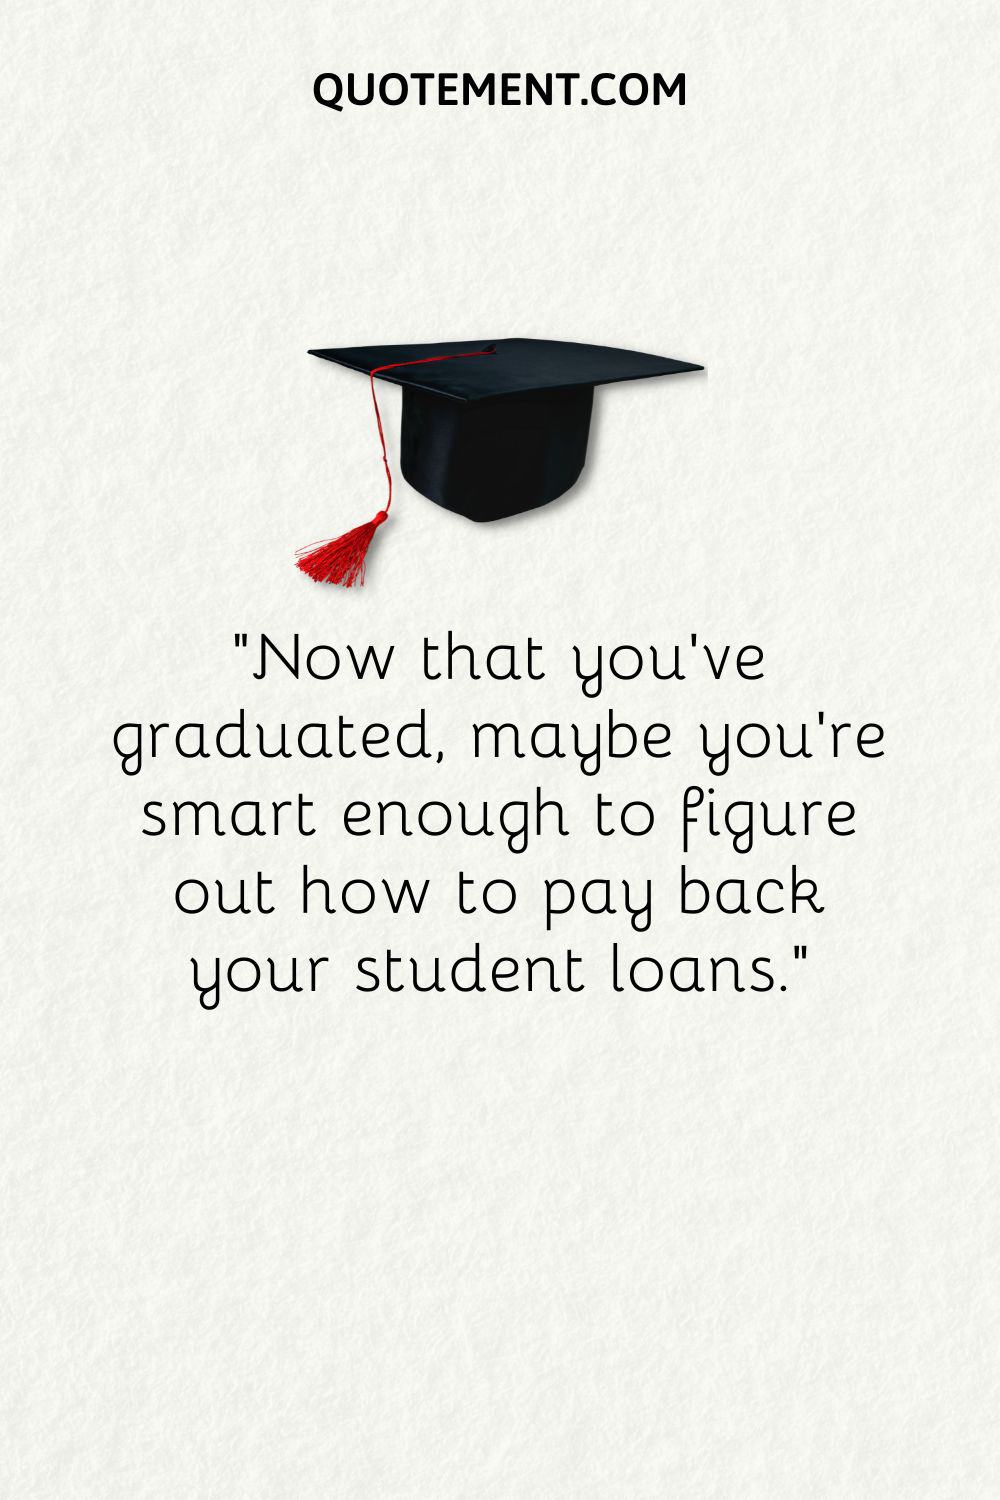 Now that you’ve graduated, maybe you’re smart enough to figure out how to pay back your student loans.